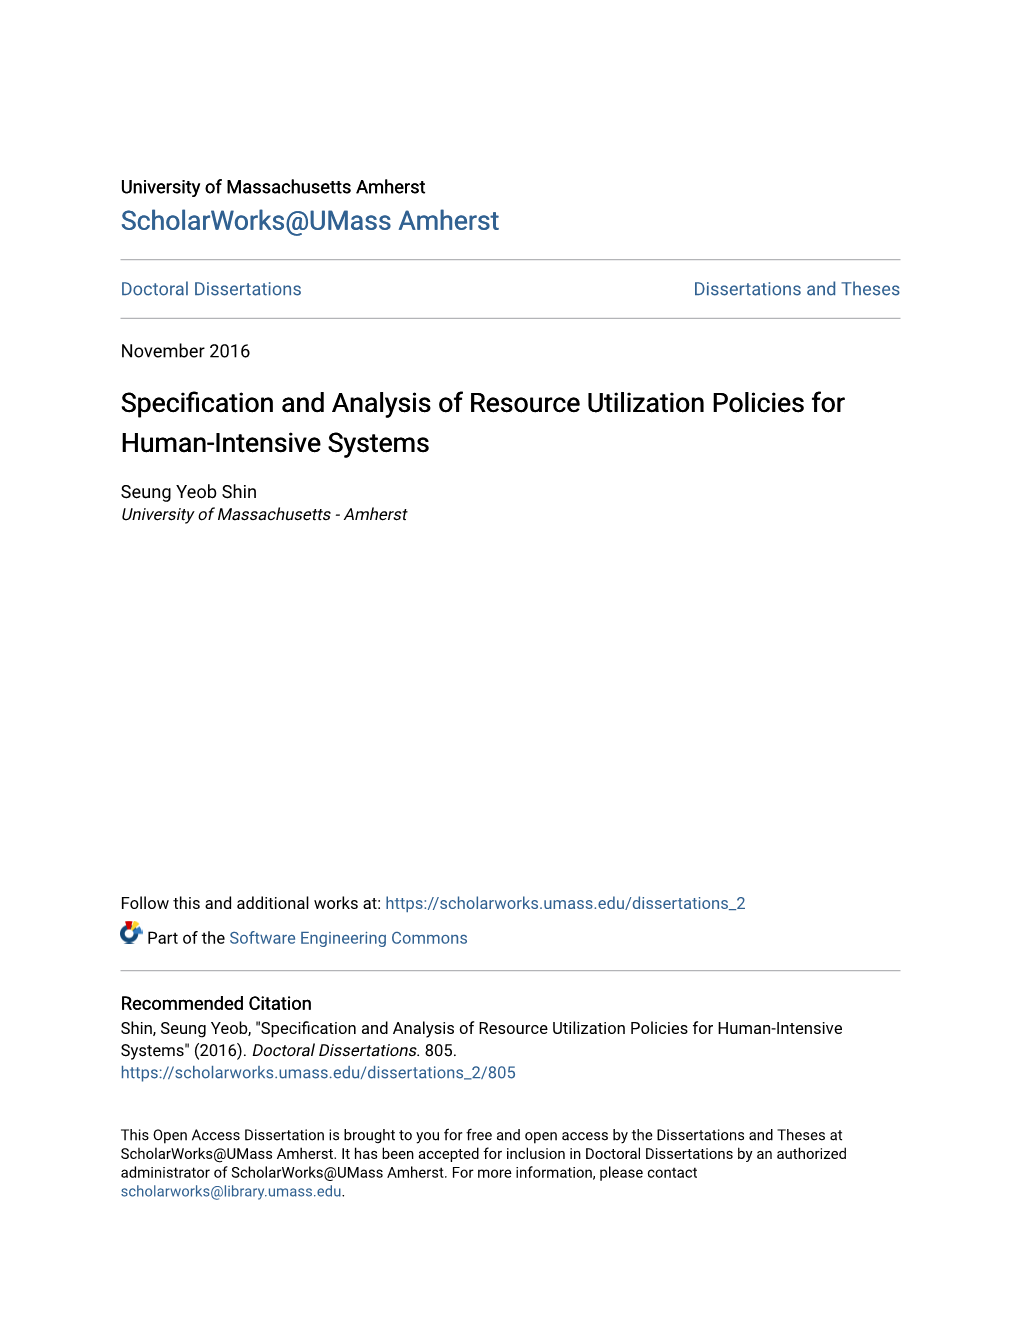 Specification and Analysis of Resource Utilization Policies for Human-Intensive Systems